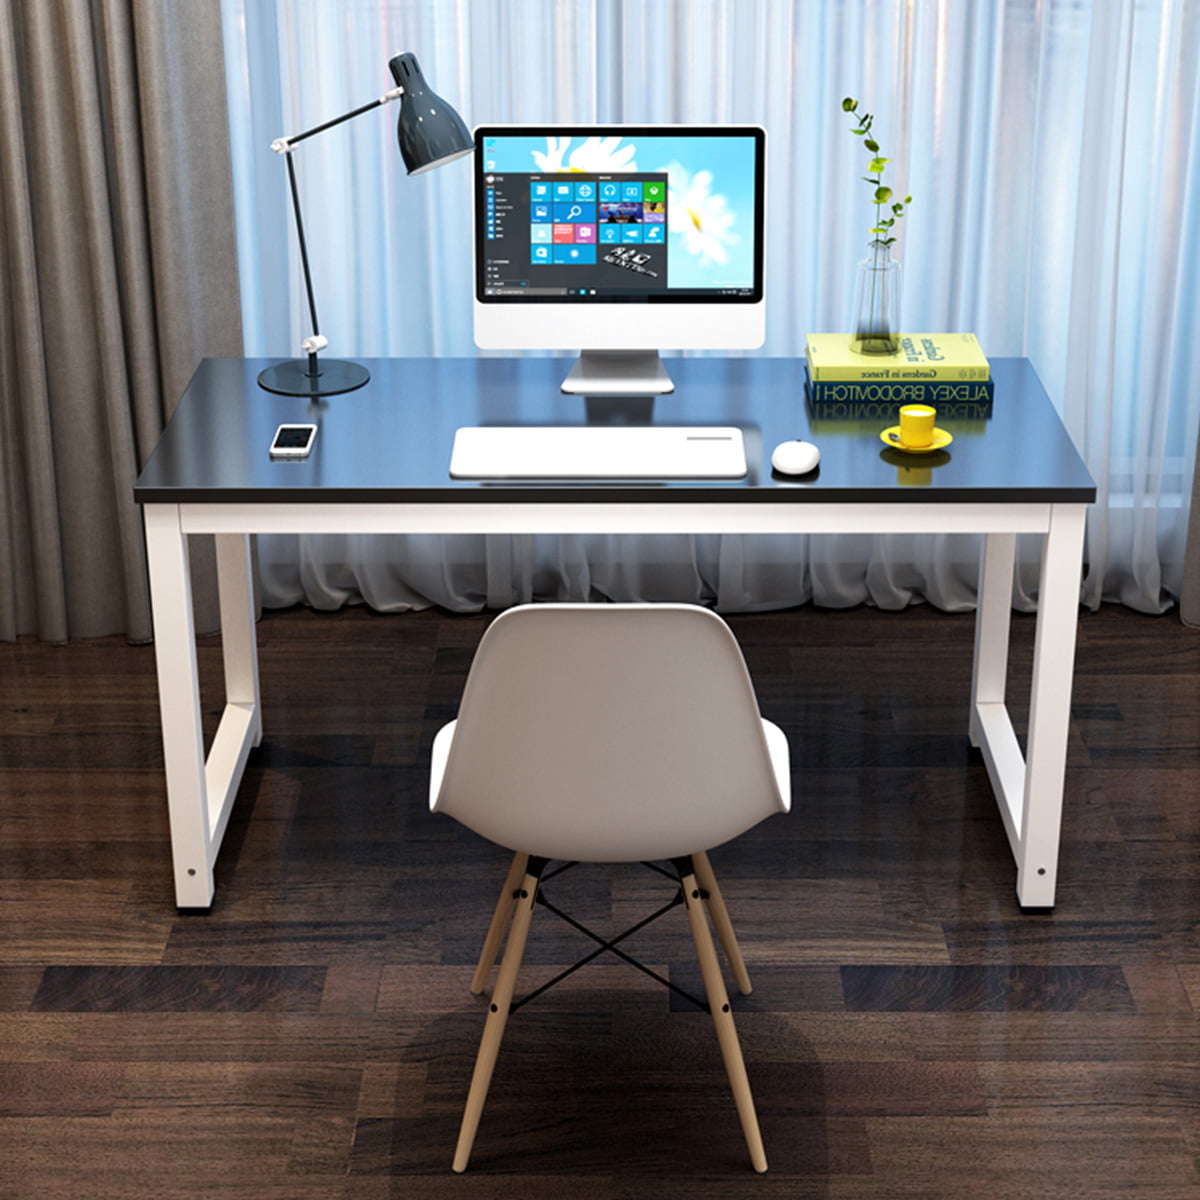 Details about   NEW Computer Desk PC Laptop Table Wood Workstation Study Home Office Furniture 